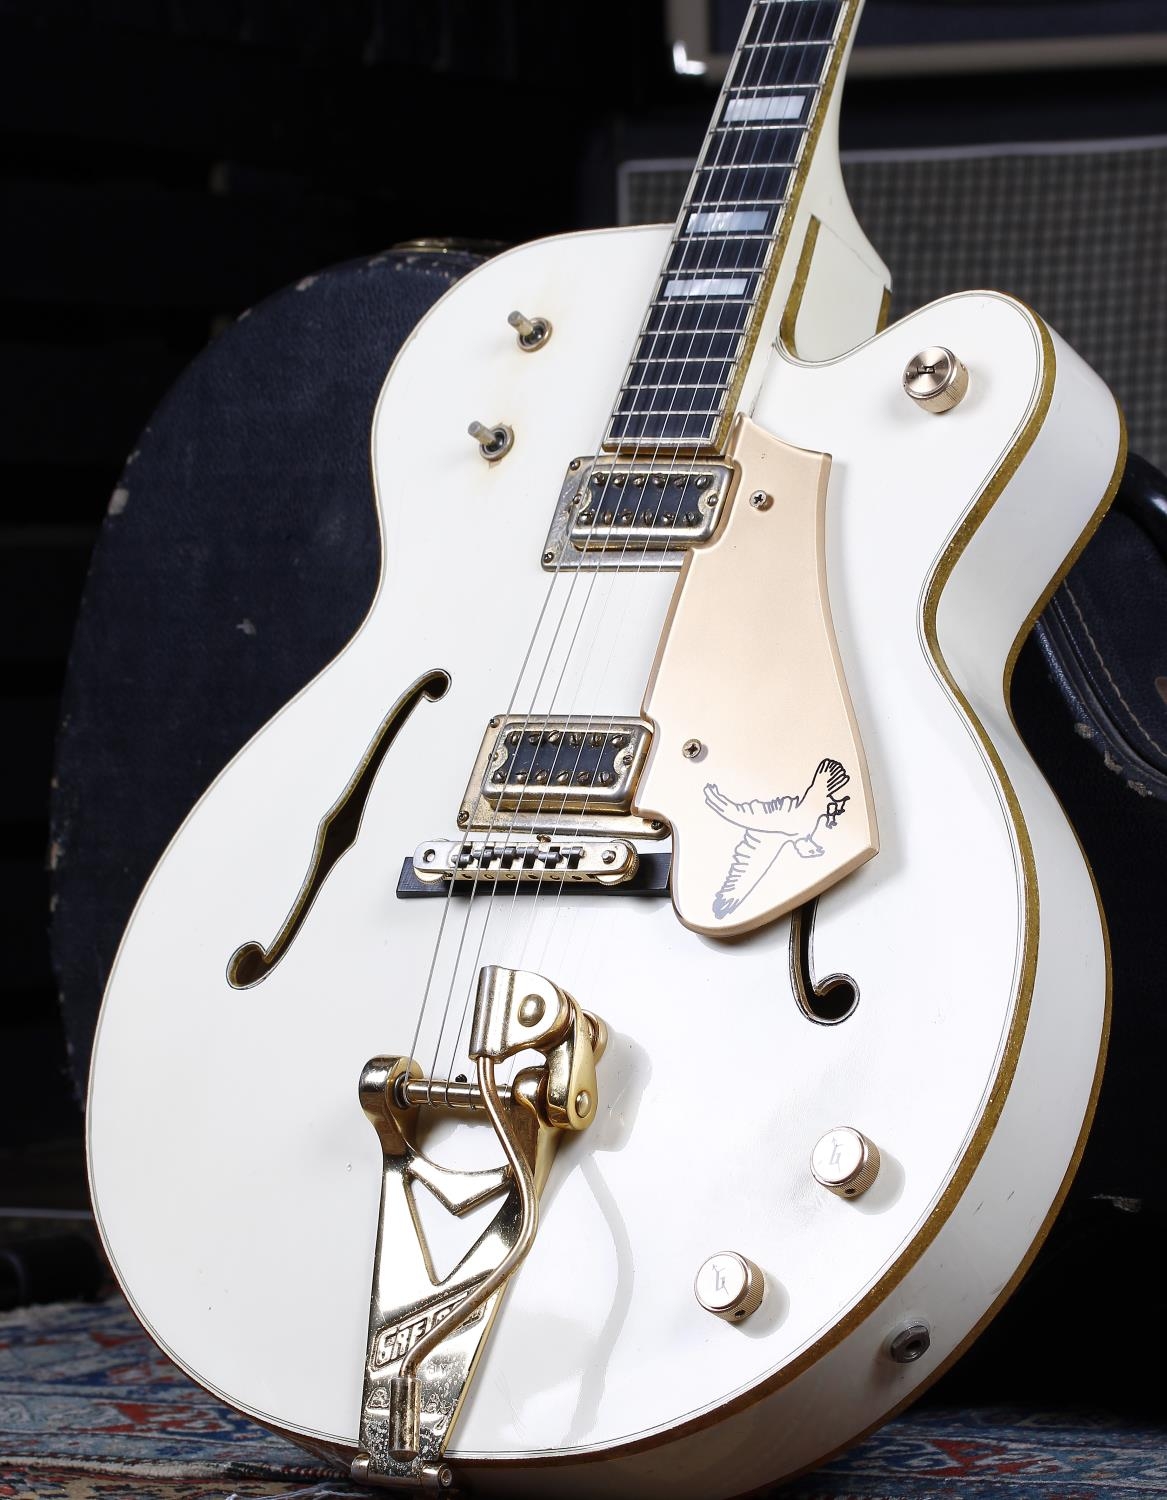 Rick Parfitt and Johnny Hallyday - 1975 Gretsch White Falcon 7593 hollow body electric guitar,